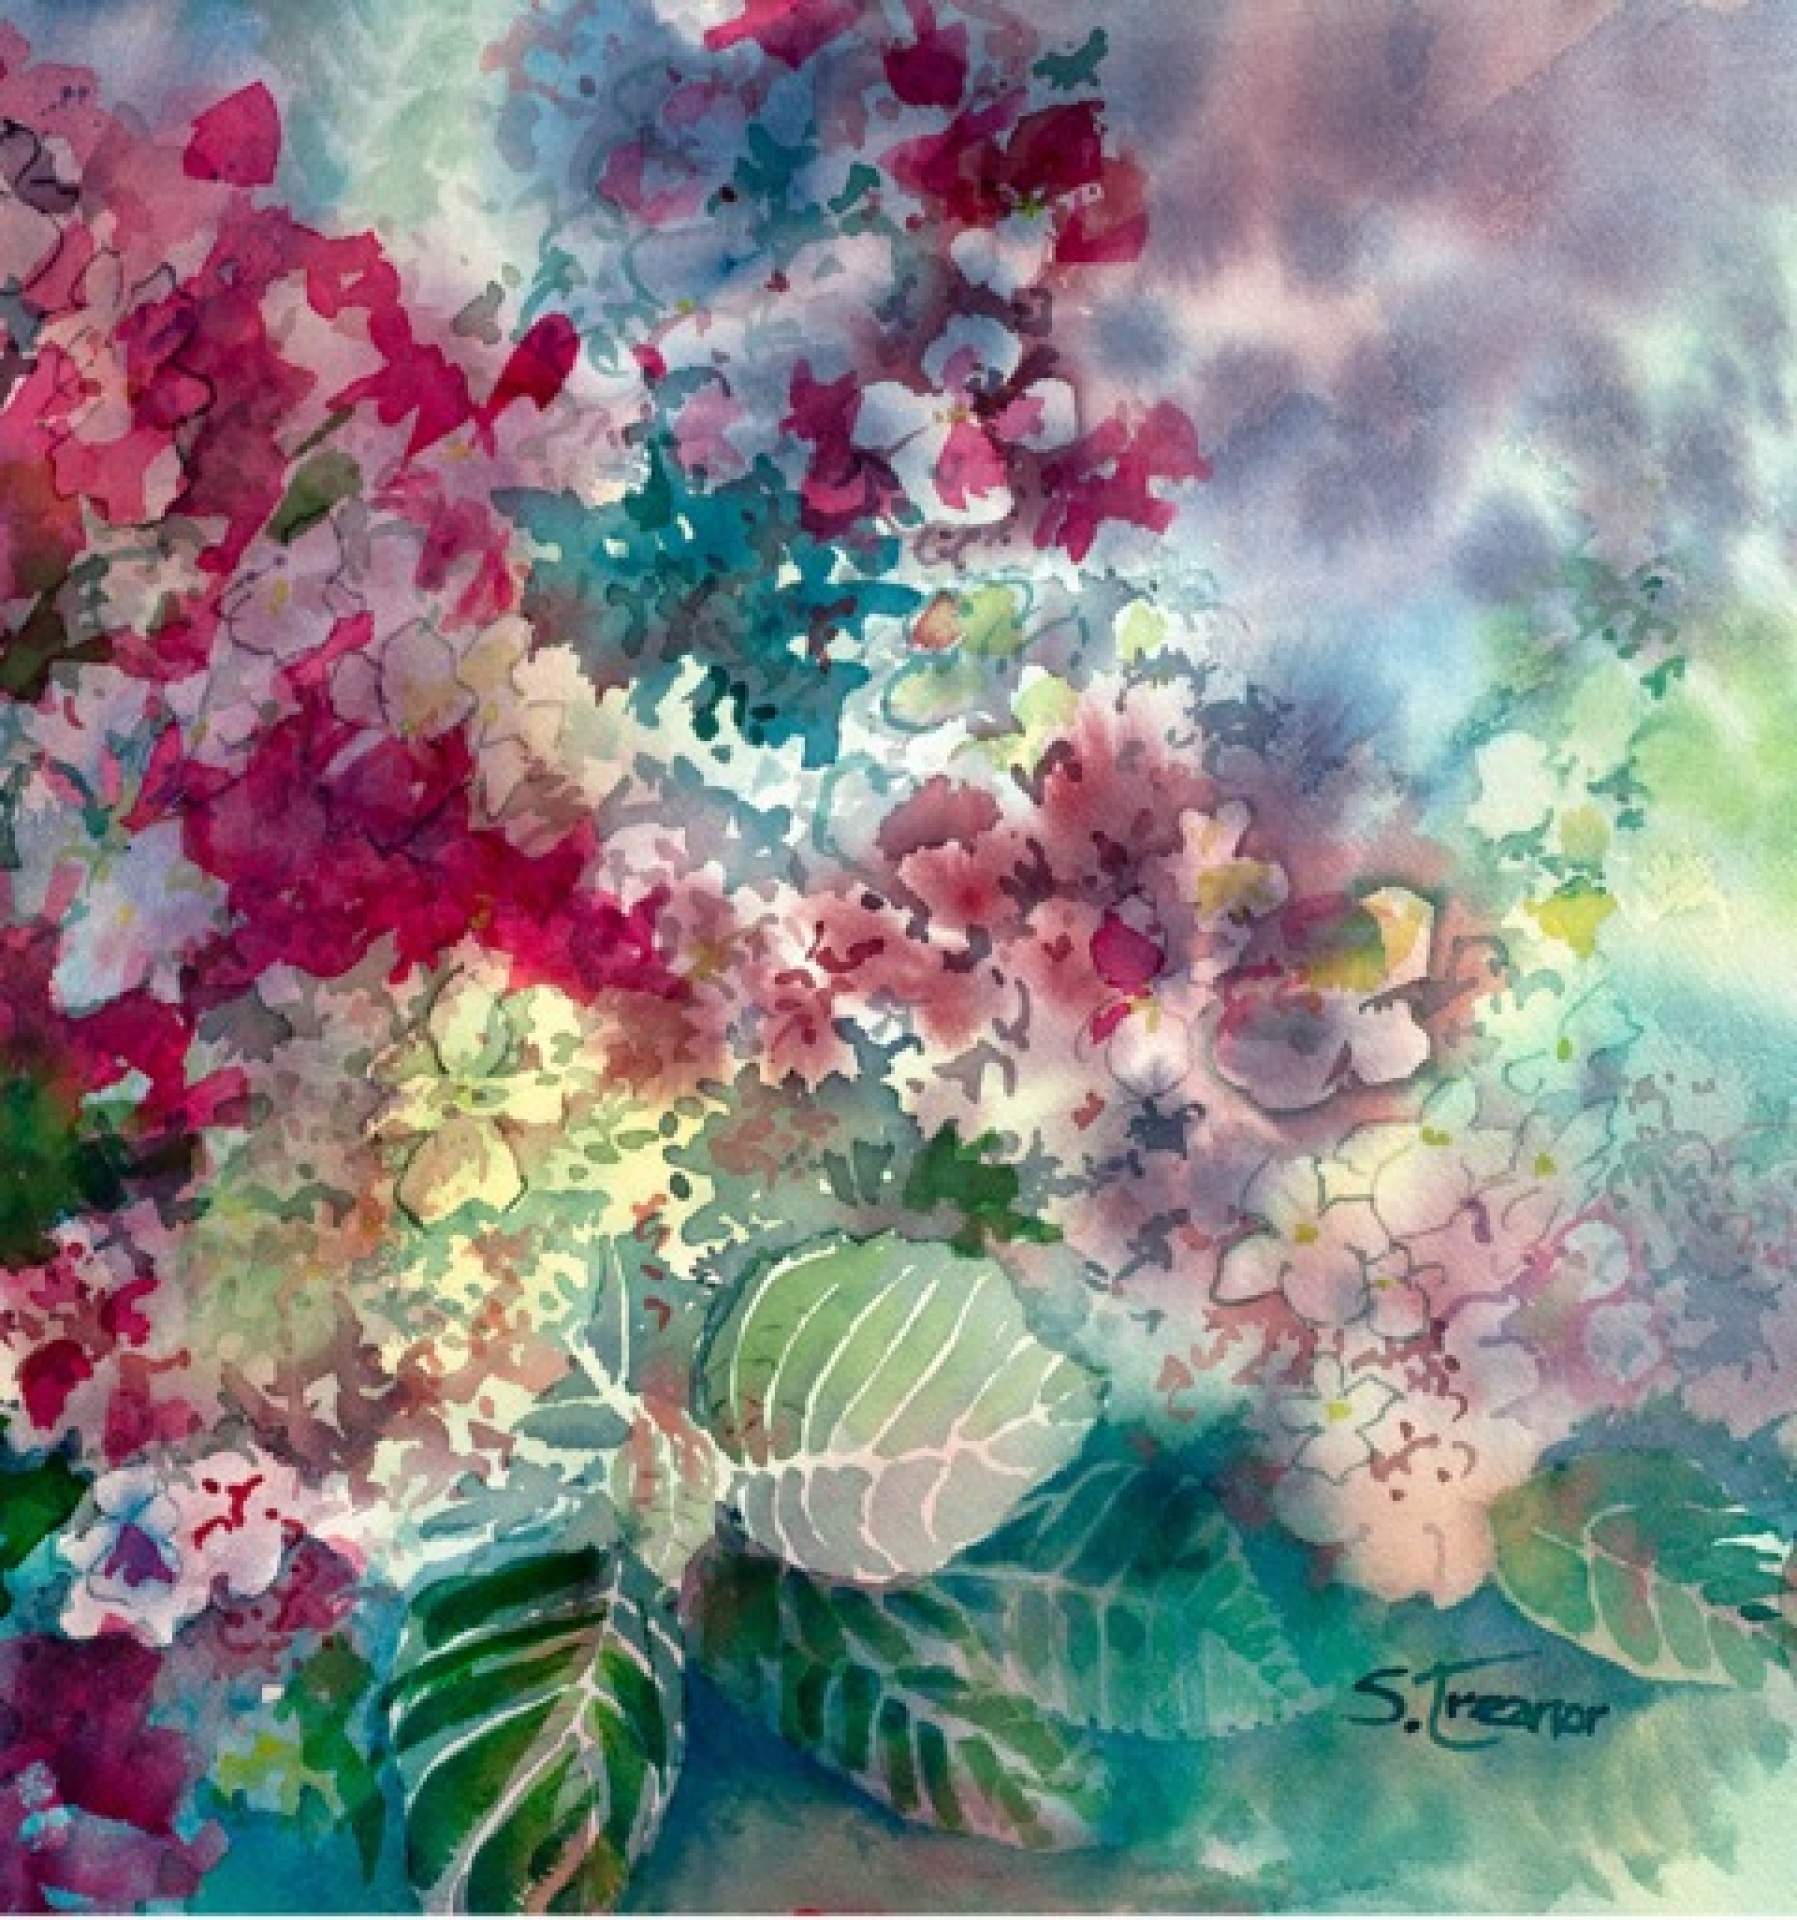 My Appreciation of Watercolor: A Personal View with Sally Treanor